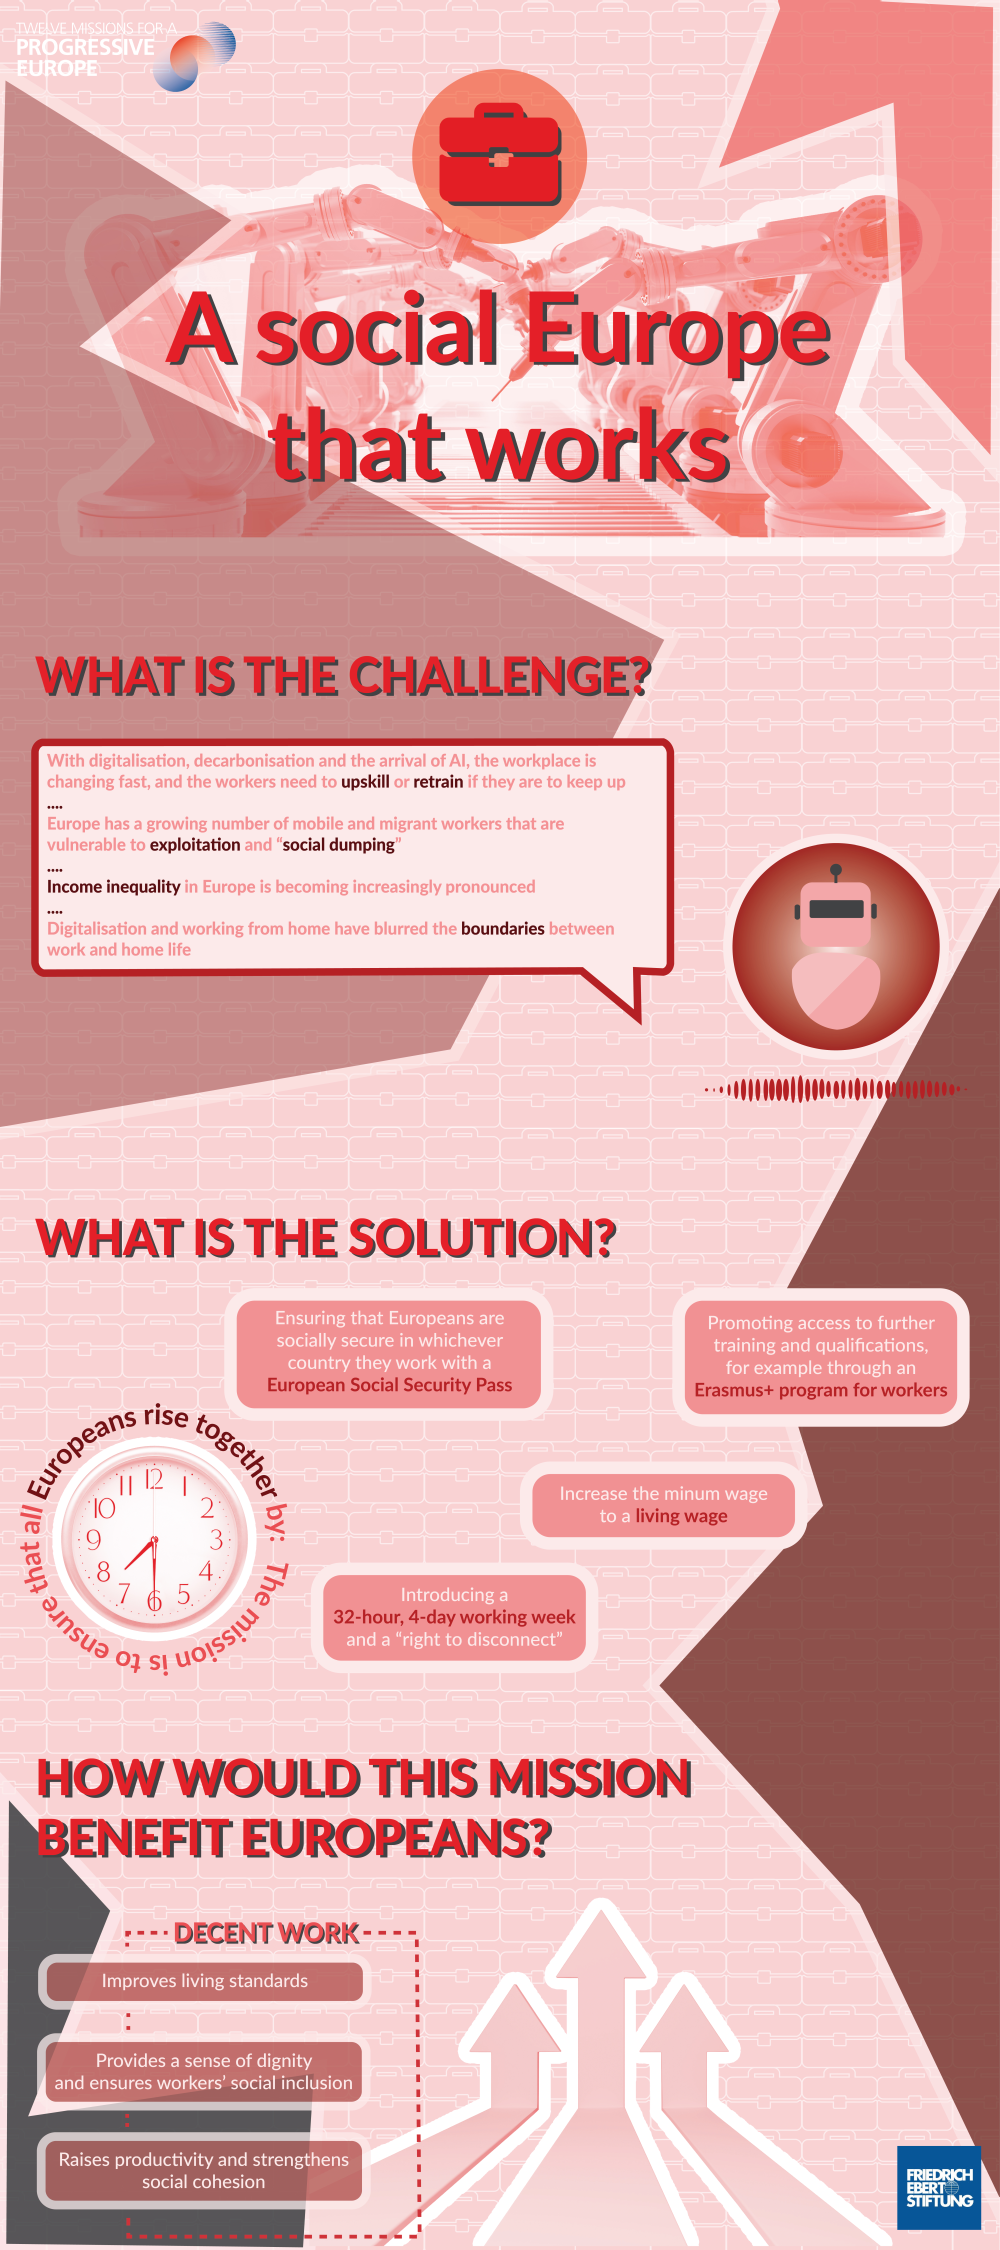 Infographic to Mission: A Social Europe that works decently